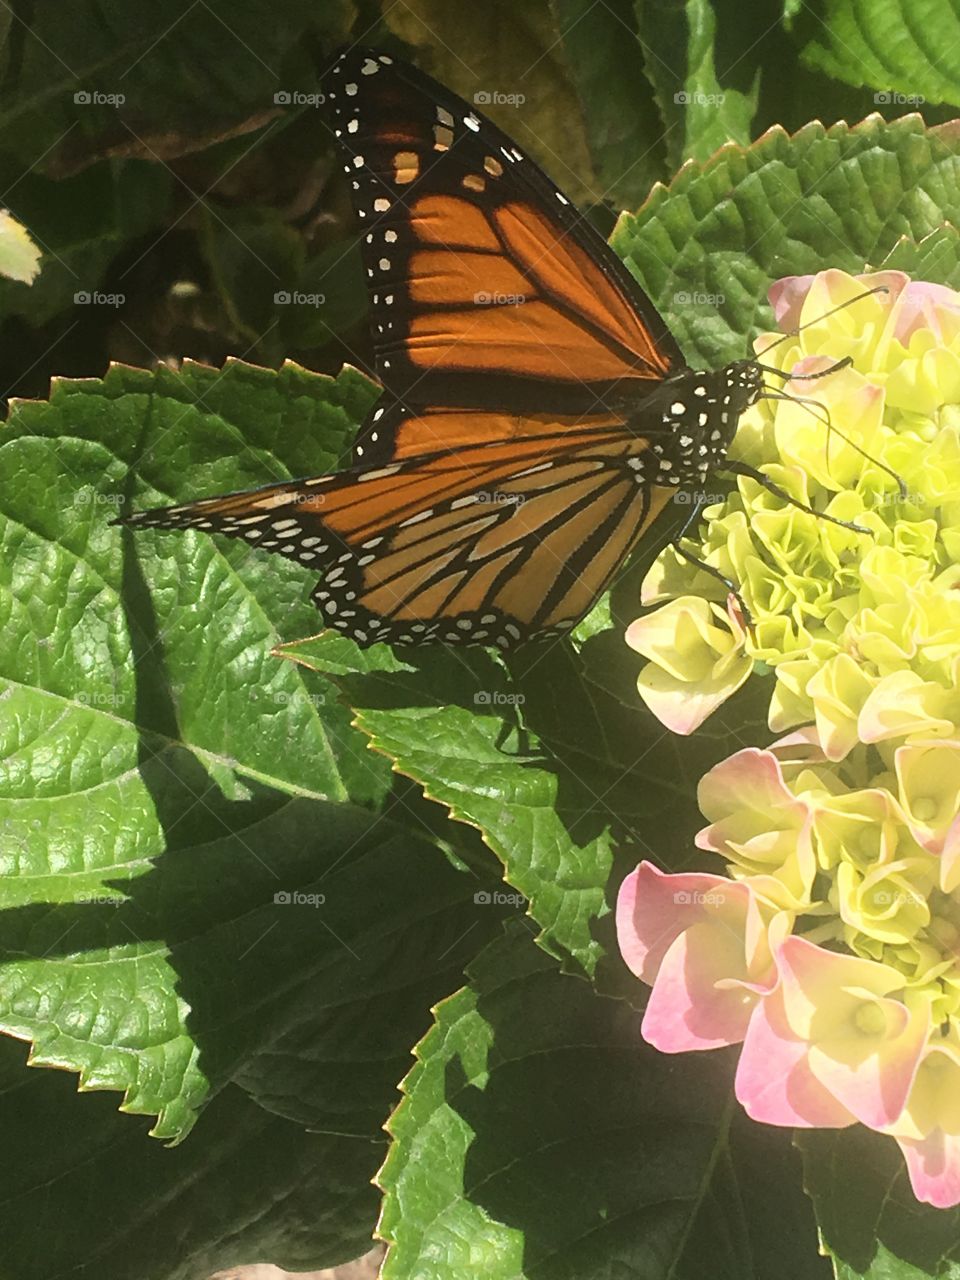 A monarch butterfly searching for nectar.